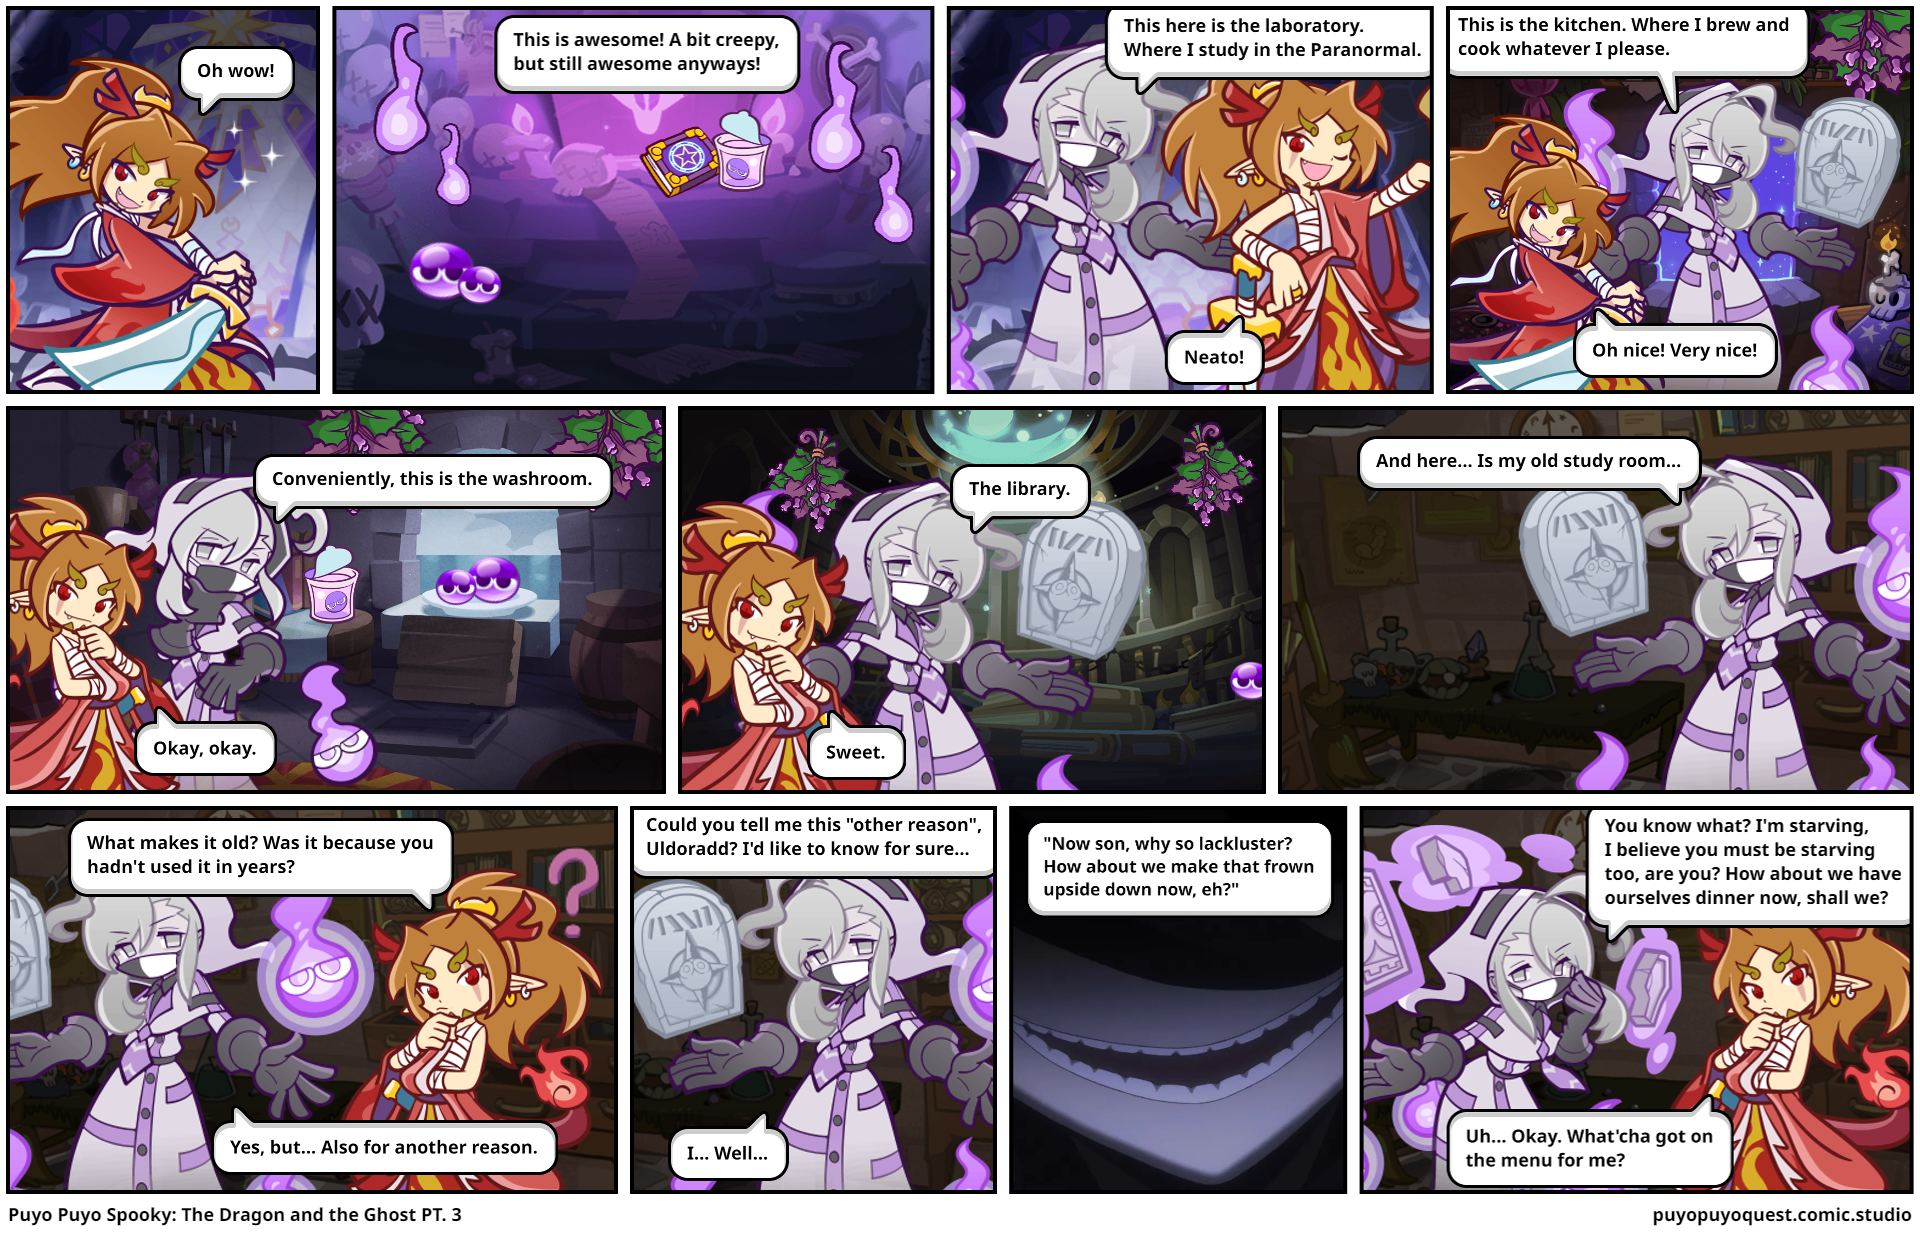 Puyo Puyo Spooky: The Dragon and the Ghost PT. 3